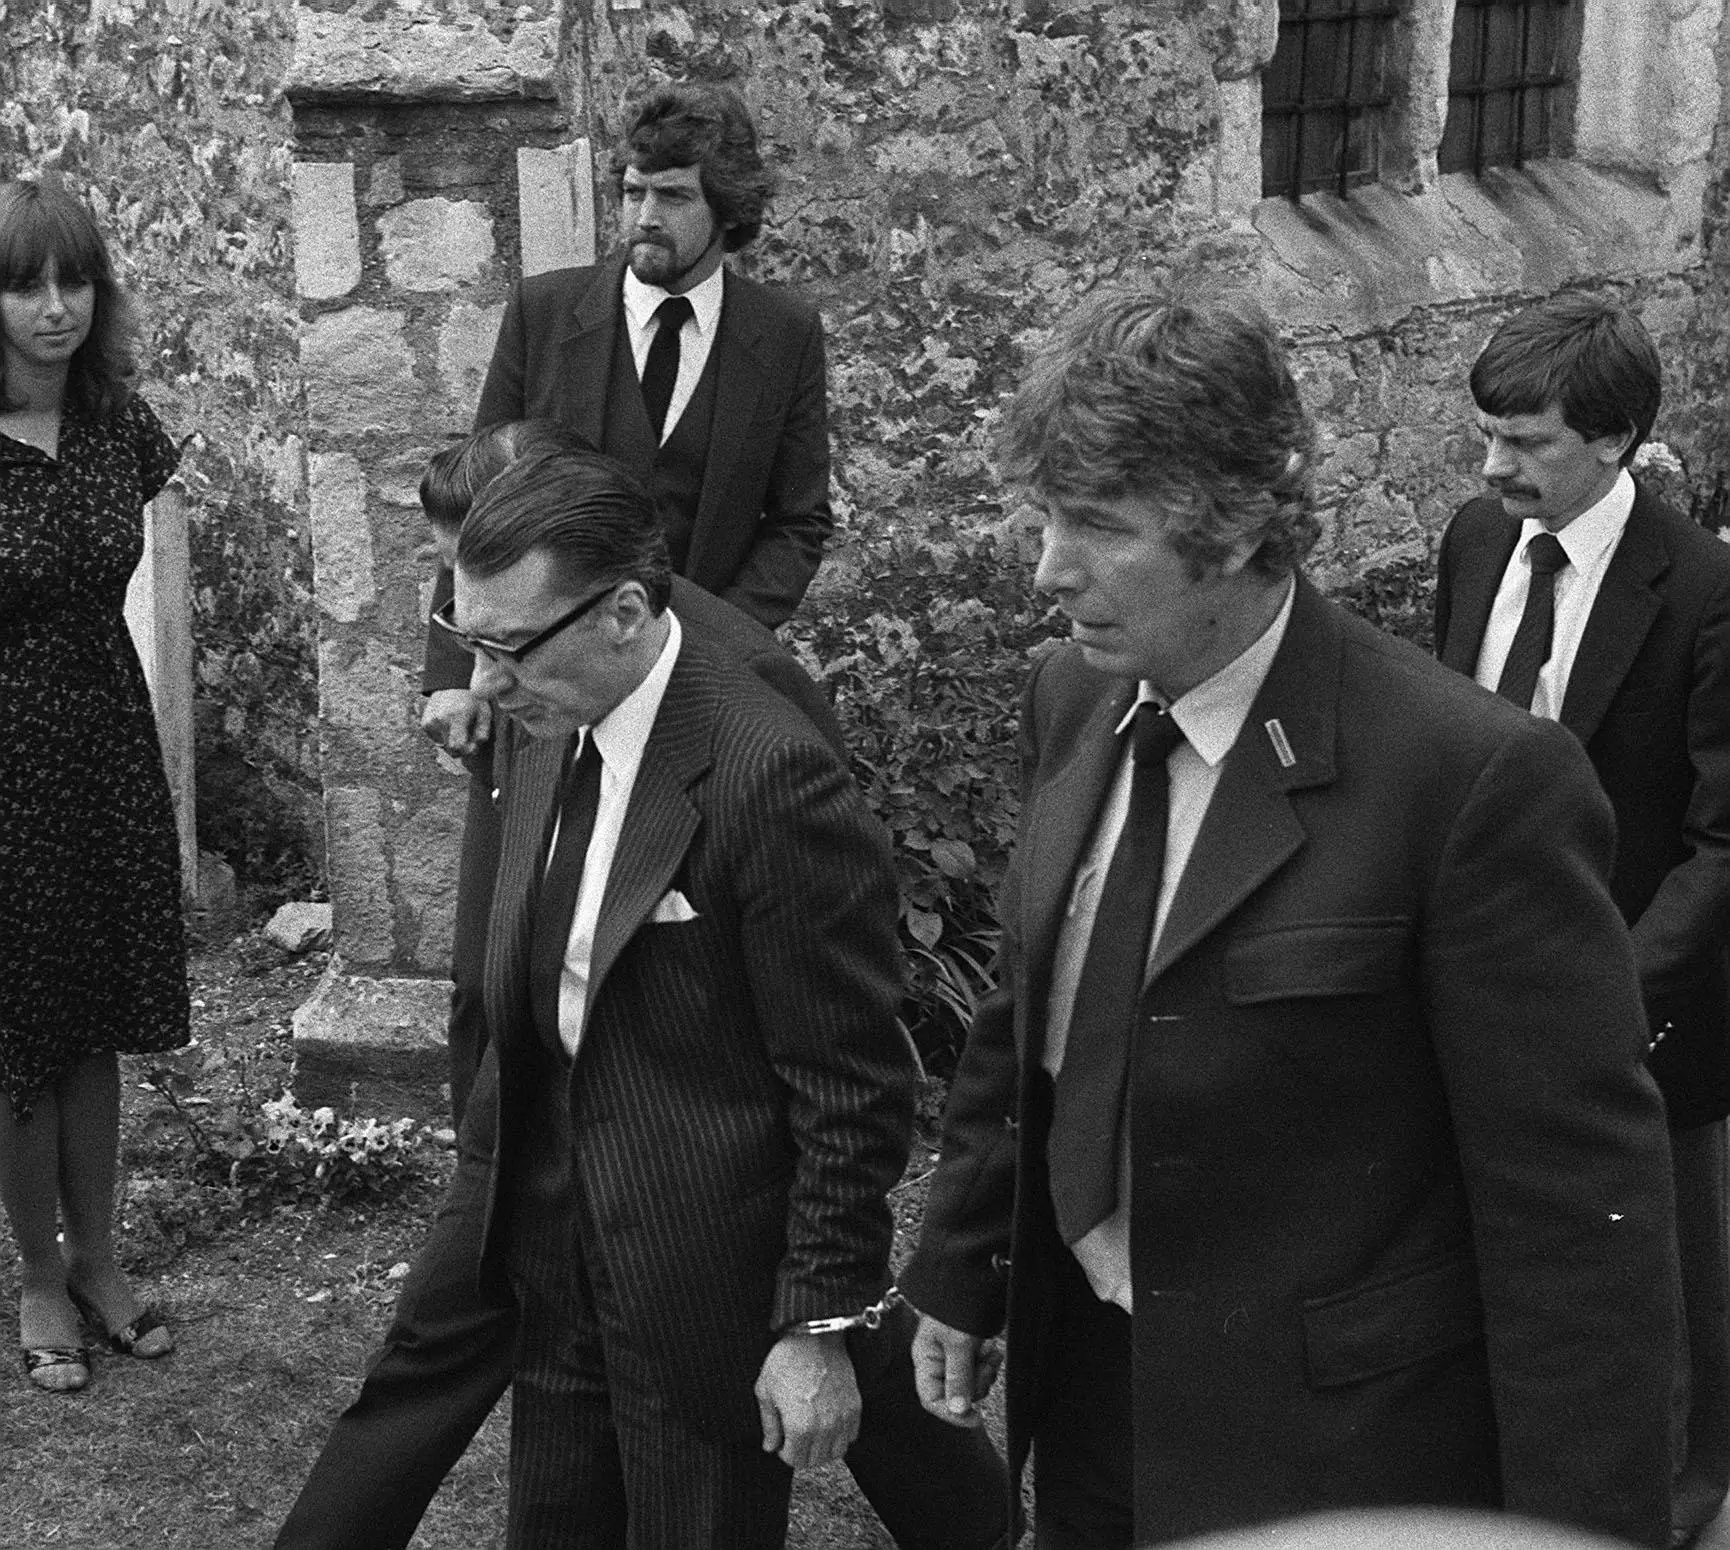 Reggie Kray at the funeral of his mother in 1982.